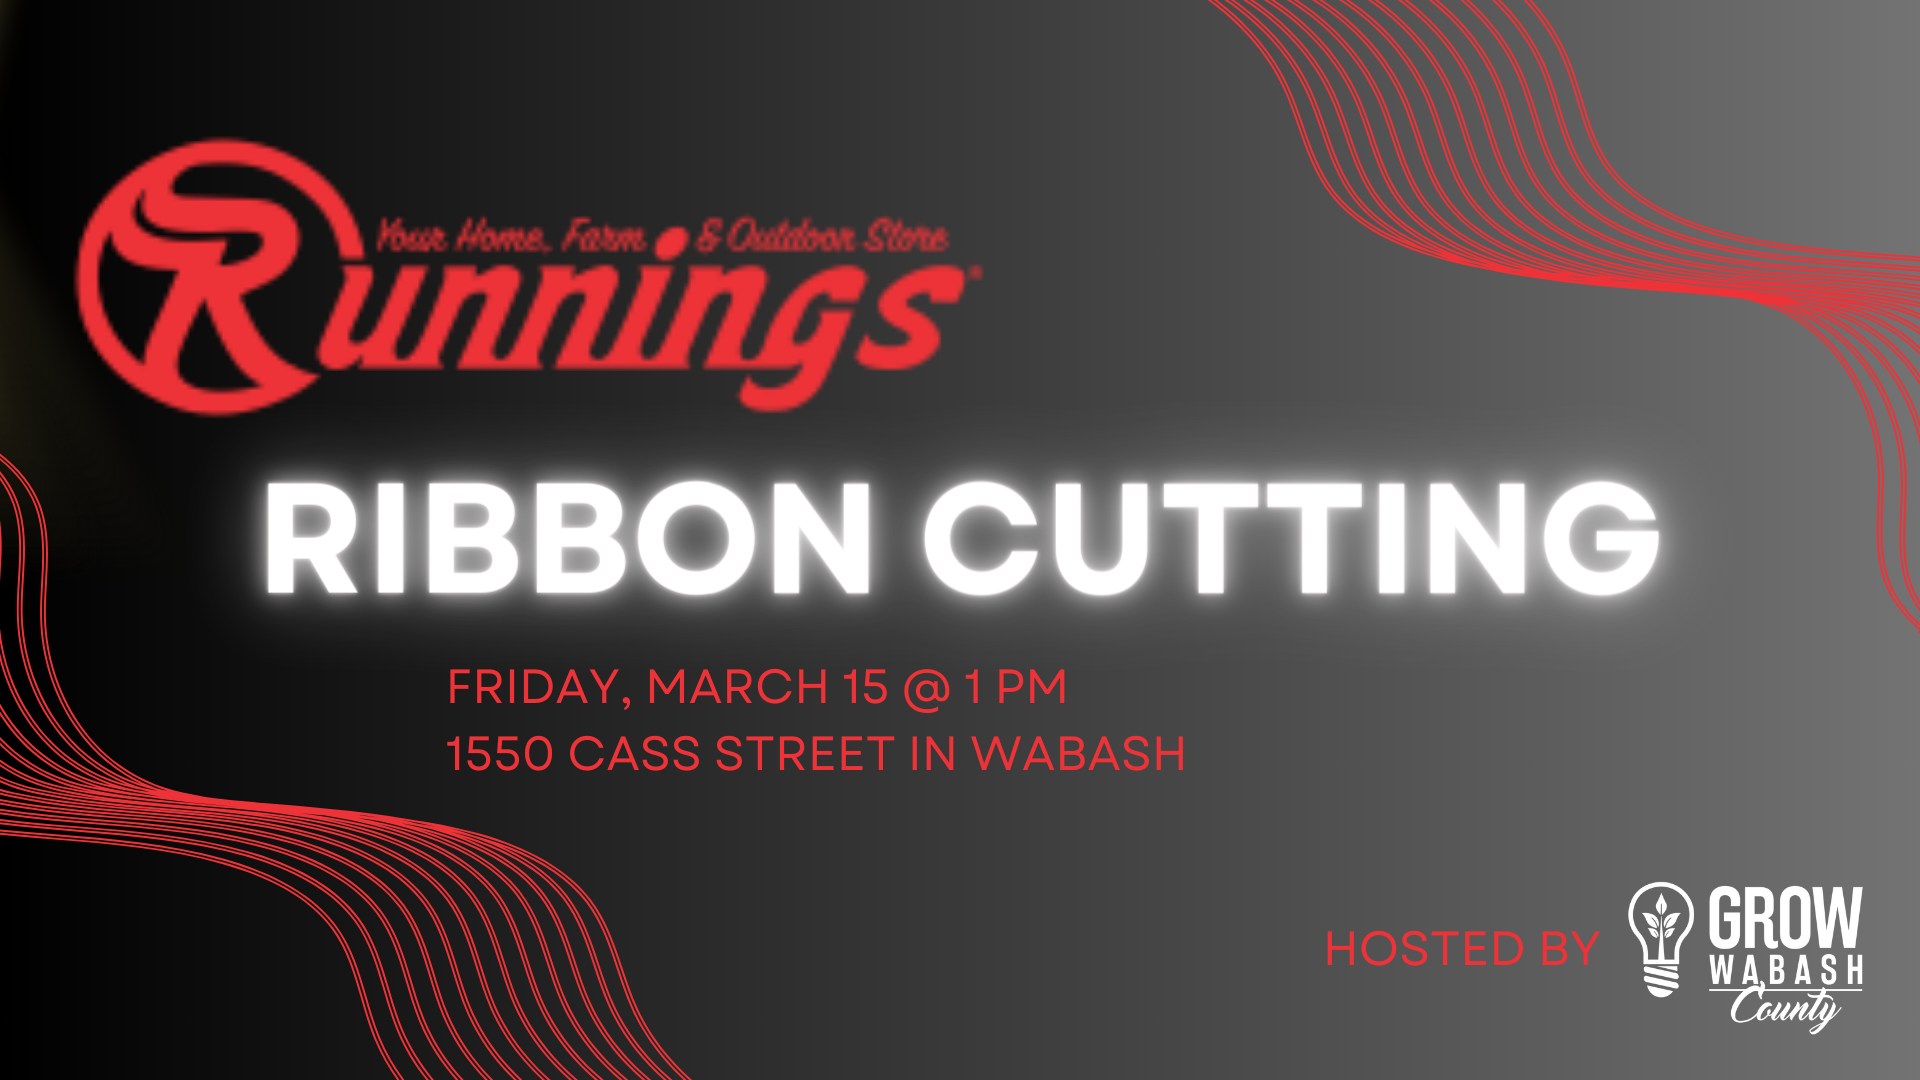 Grow Wabash County to host ribbon cutting for Runnings store opening Photo